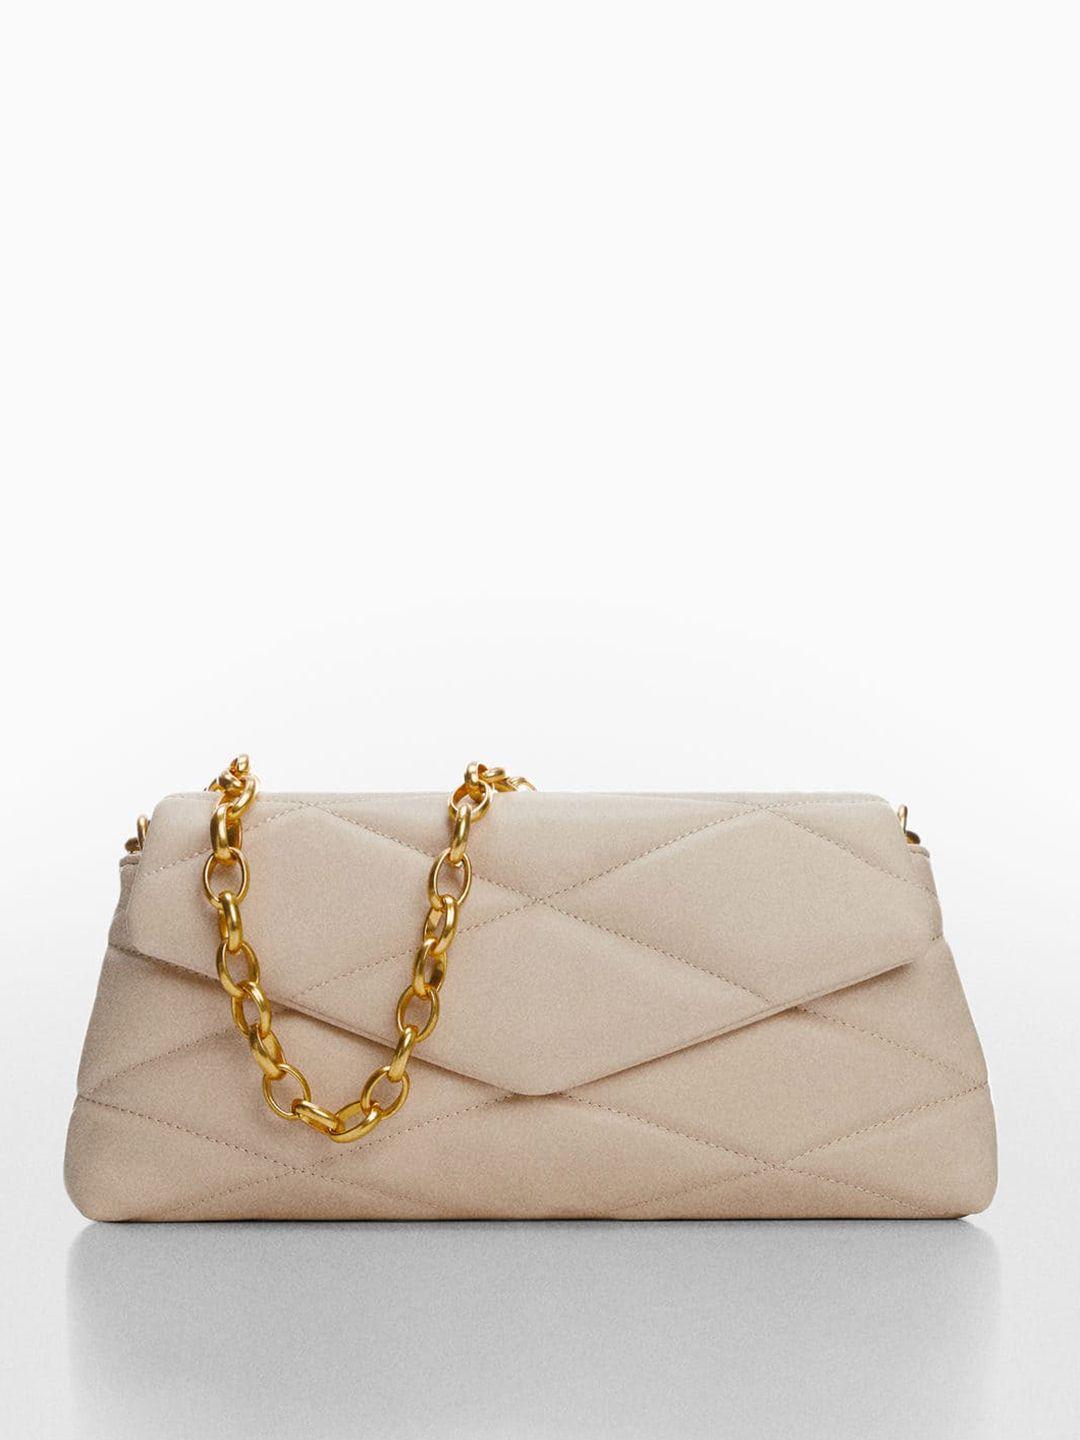 mango-quilted-envelope-clutch